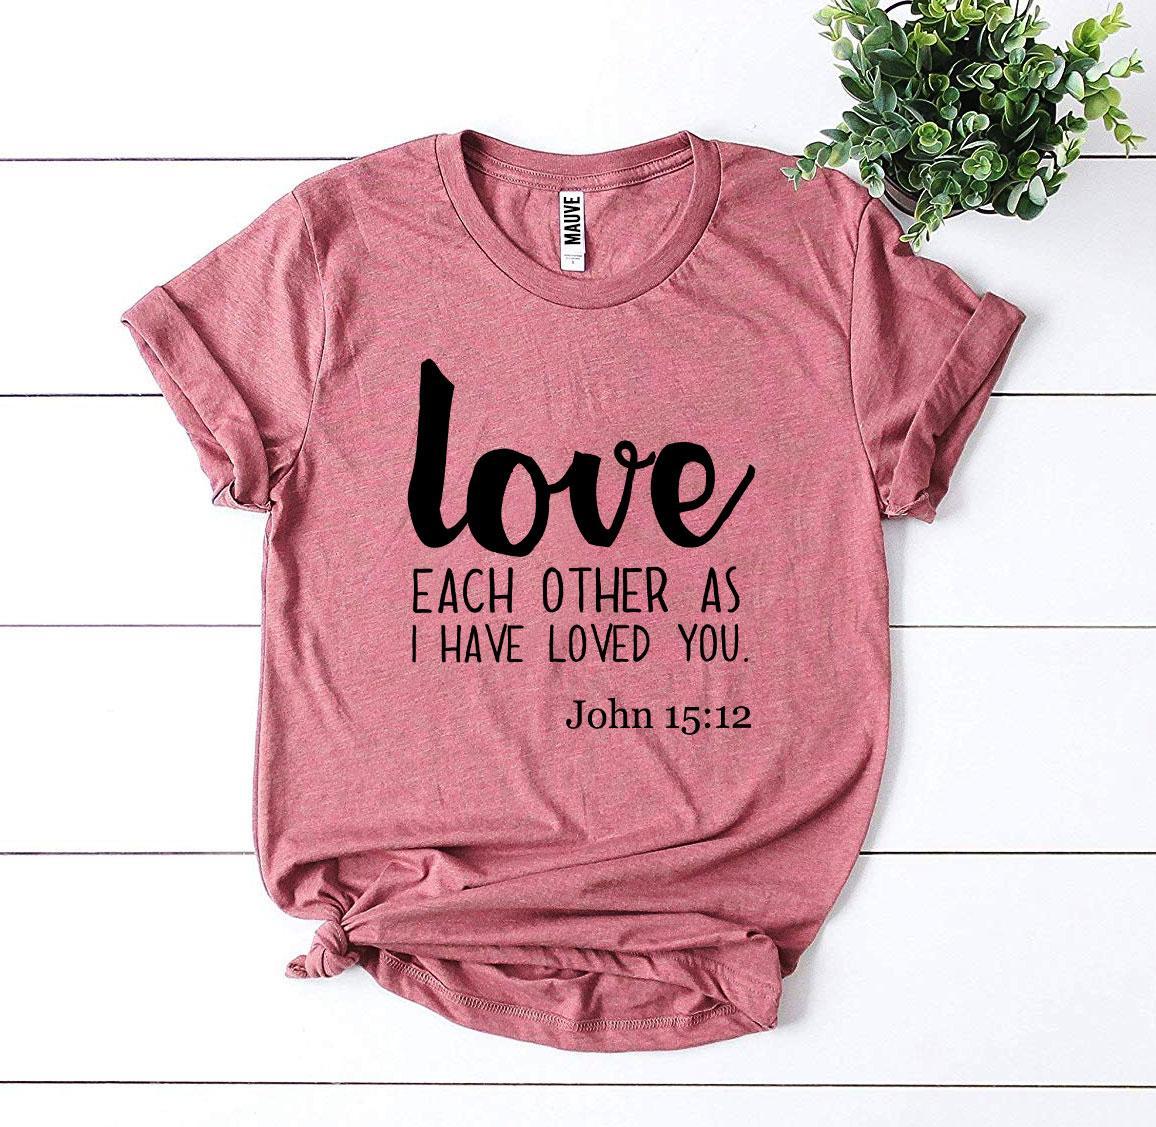 Love Each Other As I Have Loved You T-shirt - Jesus Christ Heals